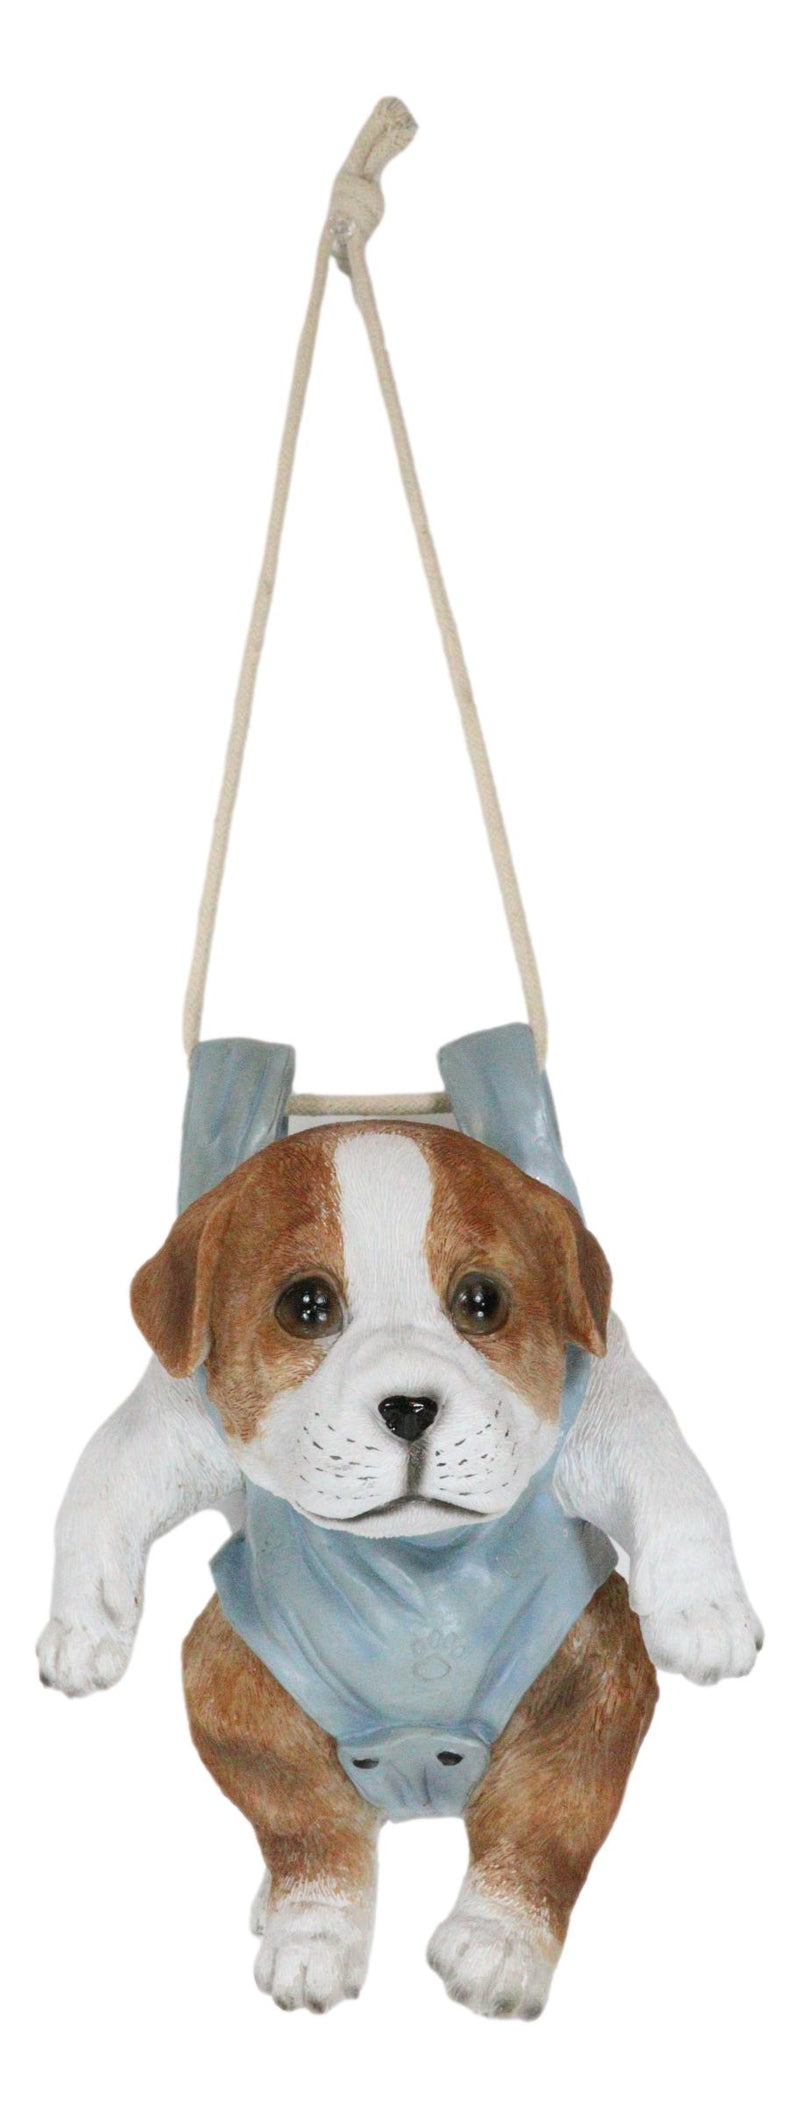 Set Of 2 Teacup Puppy Dogs On Blue And Pink Baby Onesie Swing Branch Hangers